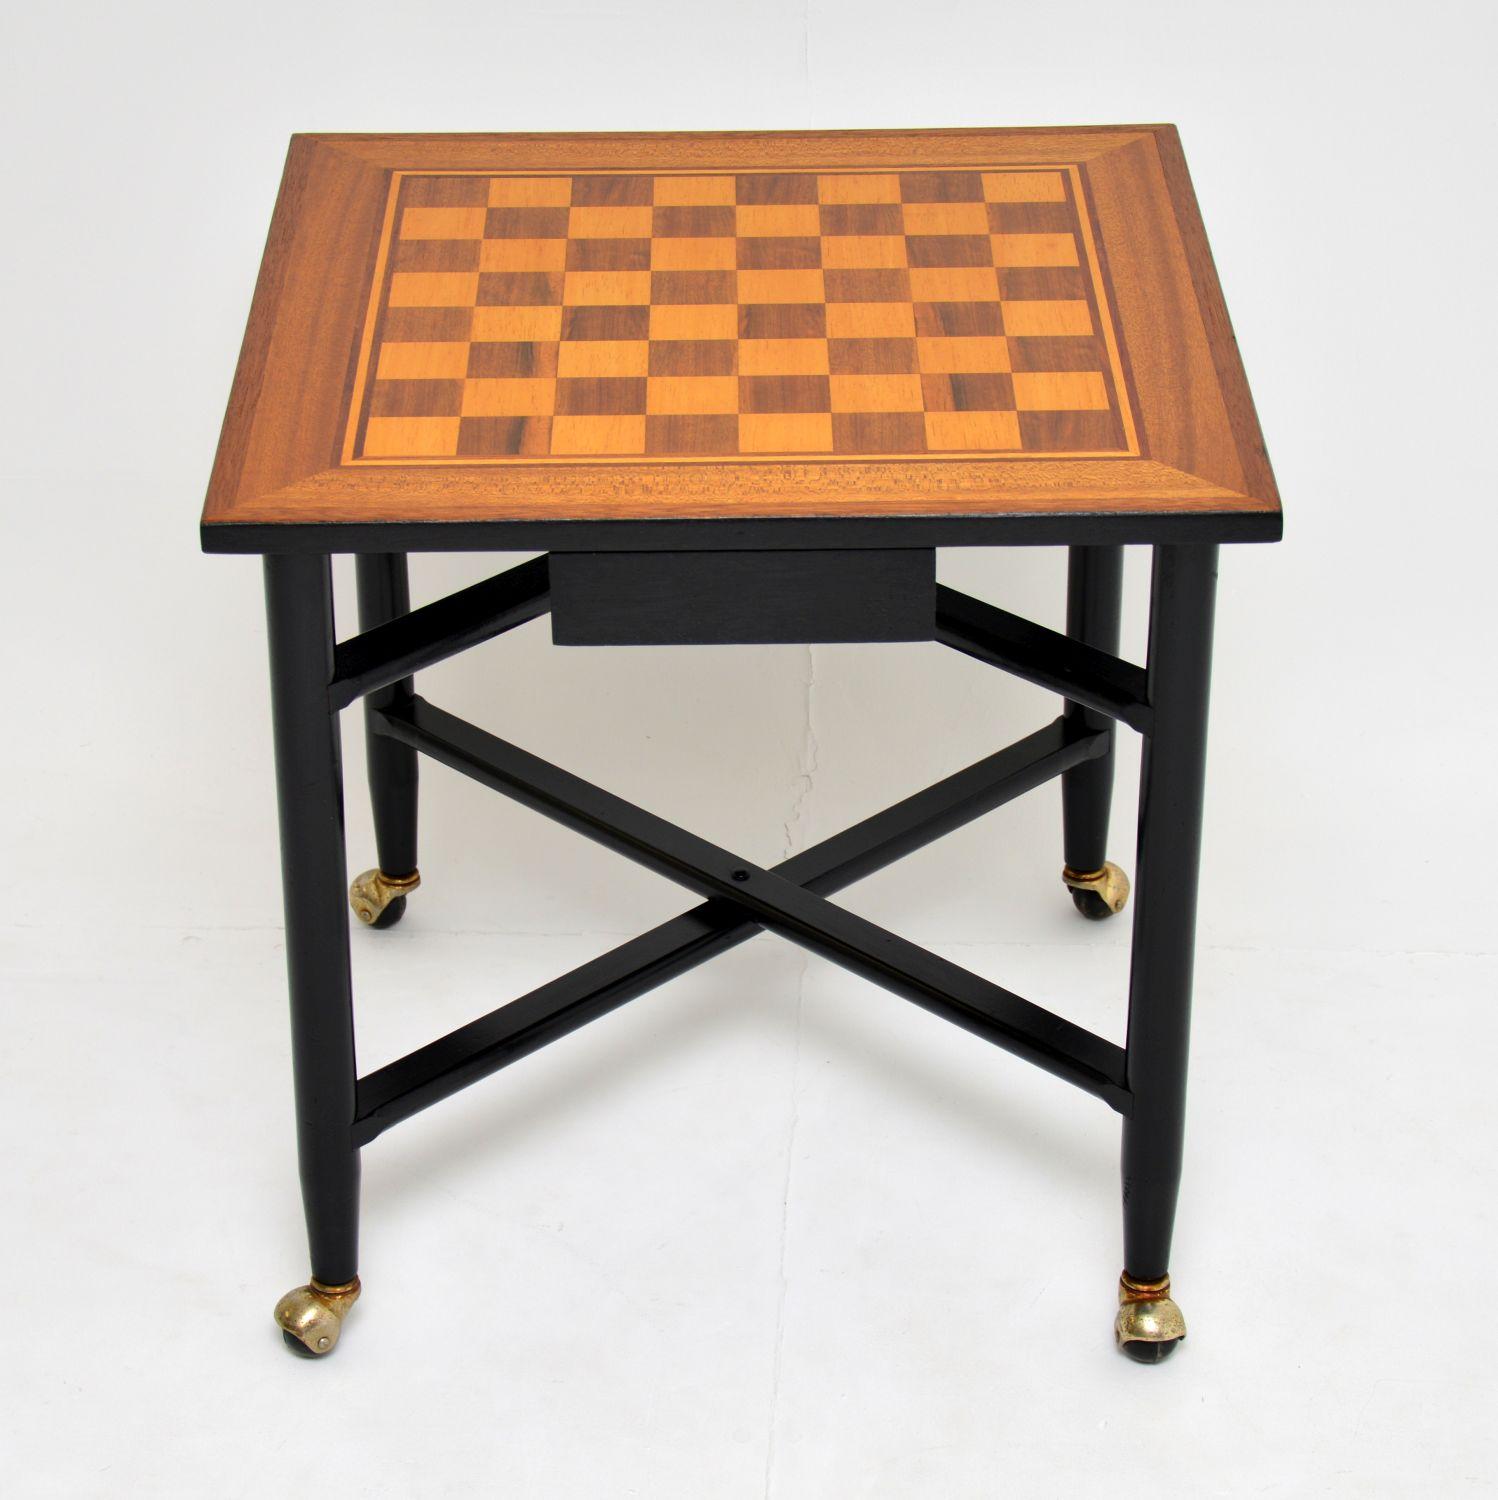 A stylish and very well made vintage chess table, this dates from the 1960s. The chessboard top is veneered in walnut, satin wood and mahogany. The base is solid ebonised wood, and there is a drawer on either side for storing chess pieces.

The